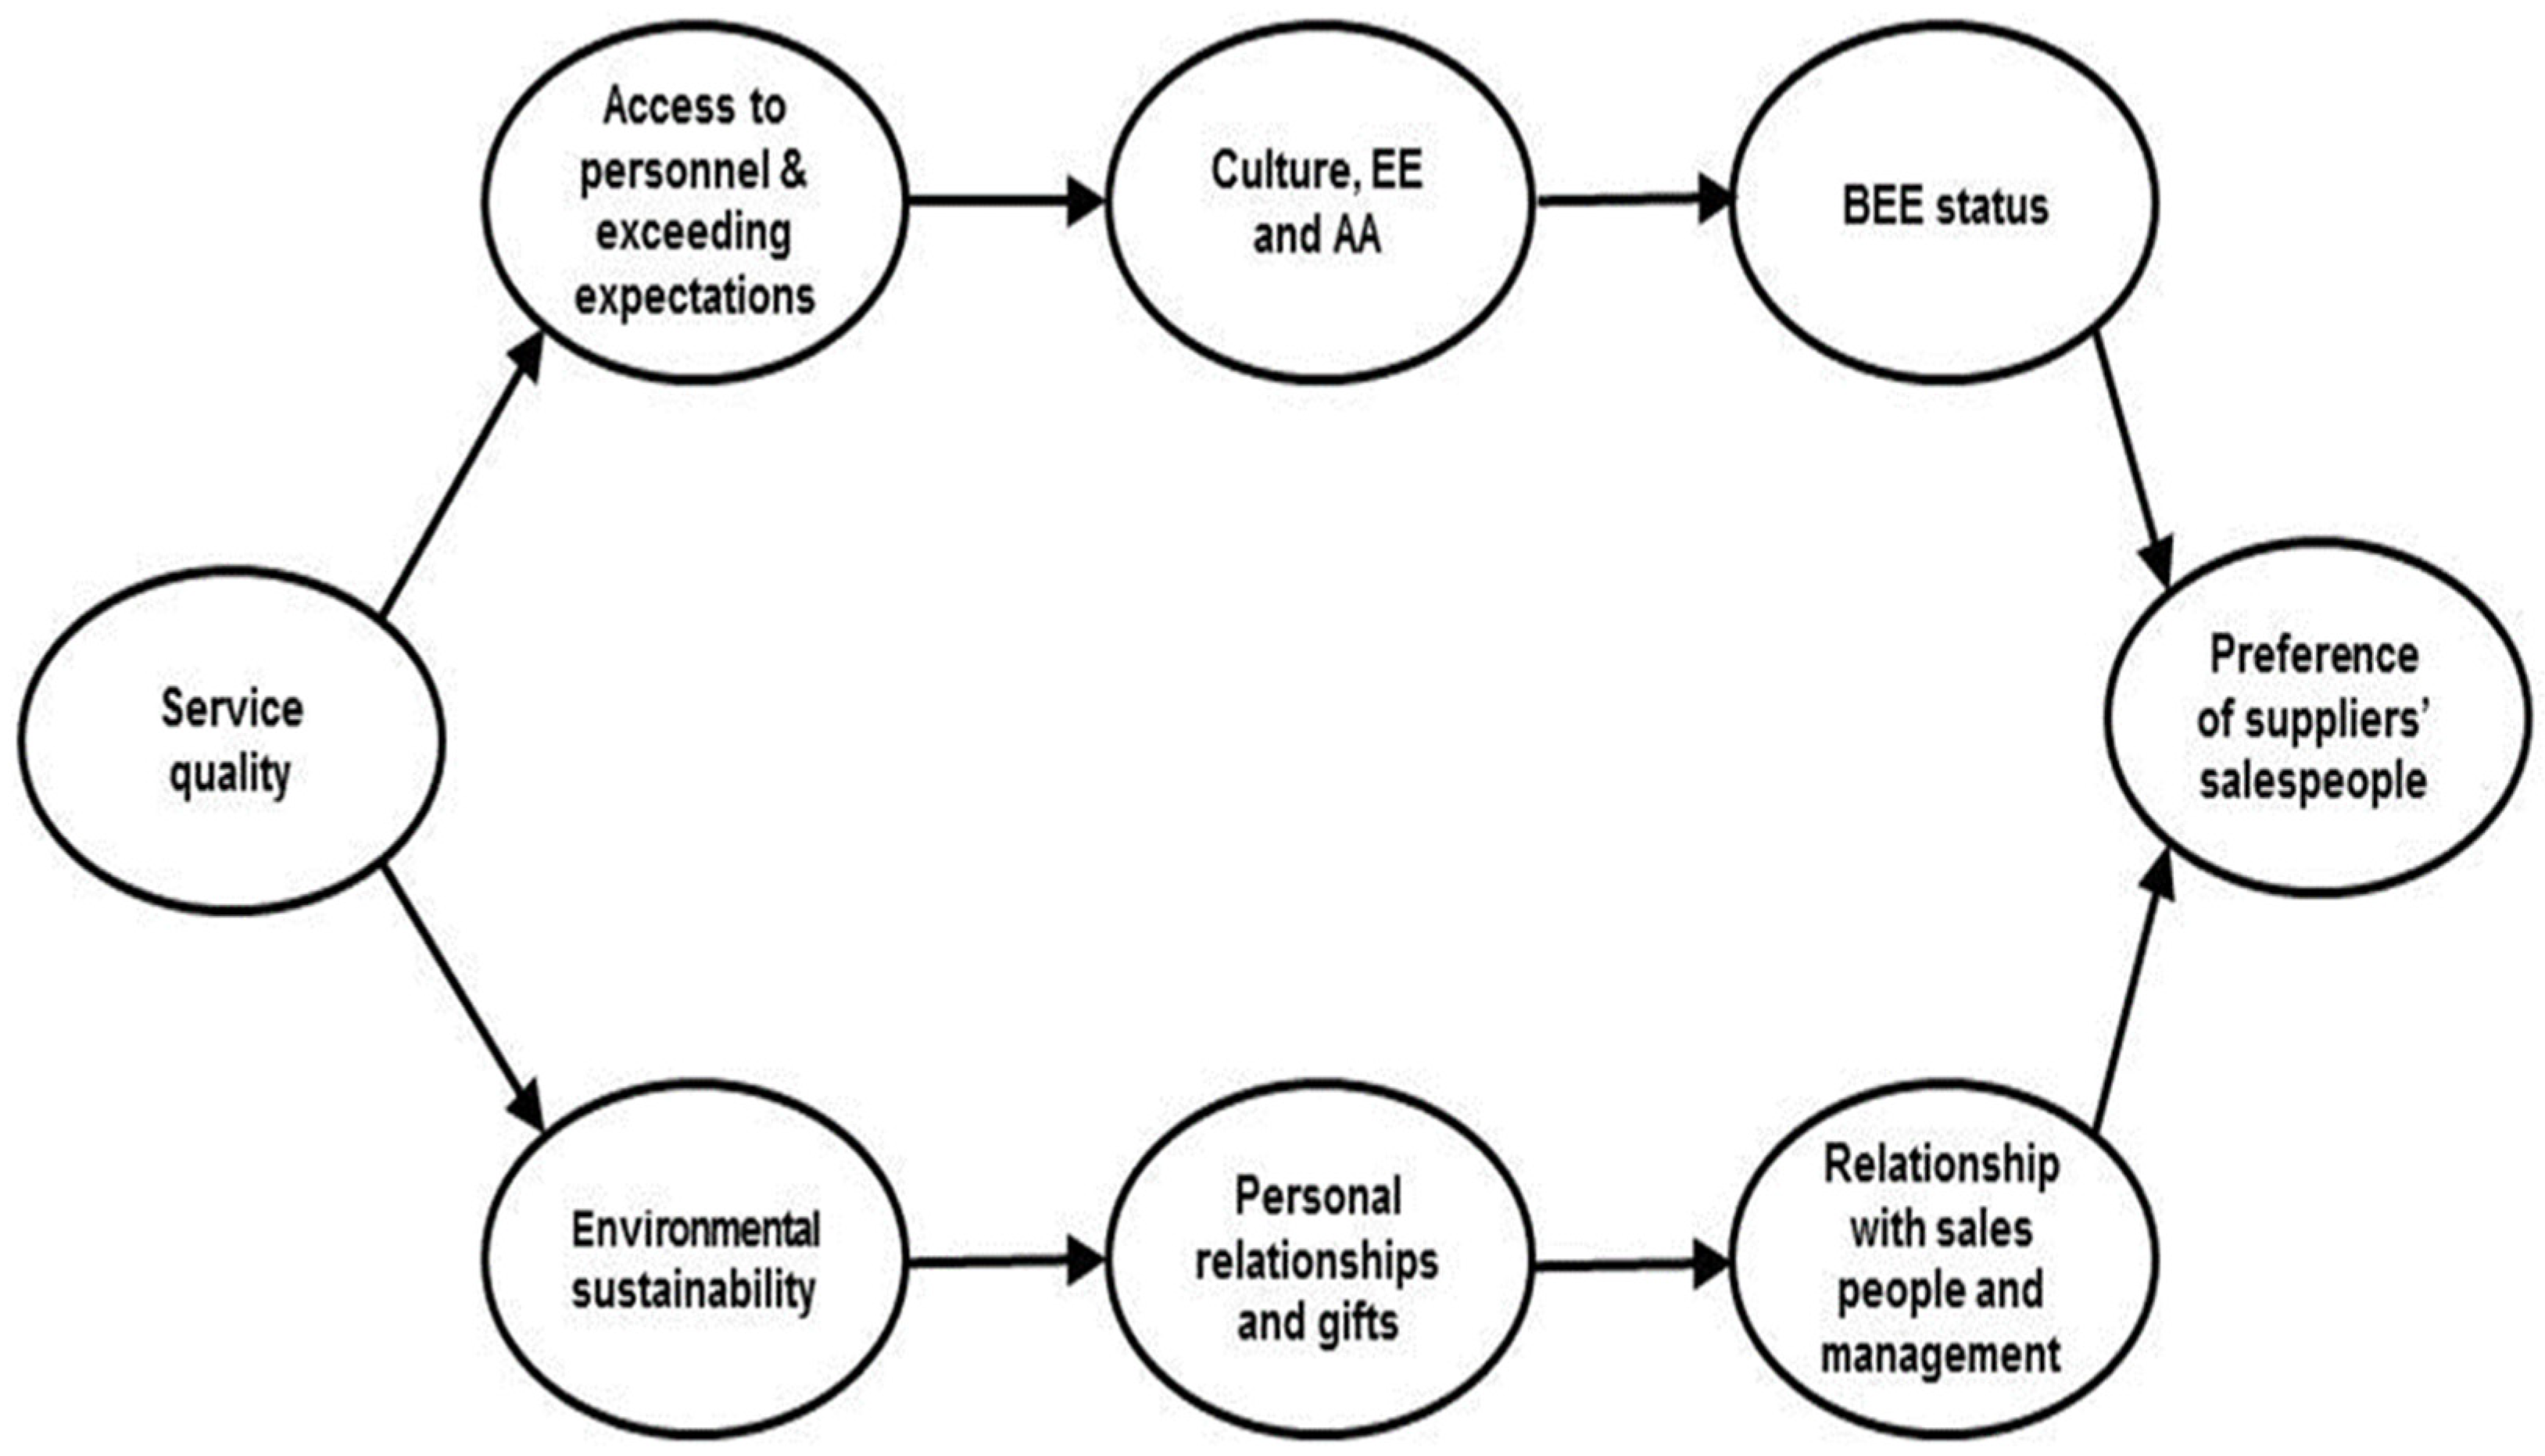 https://pub.mdpi-res.com/sustainability/sustainability-15-00411/article_deploy/html/images/sustainability-15-00411-g001.png?1672120127